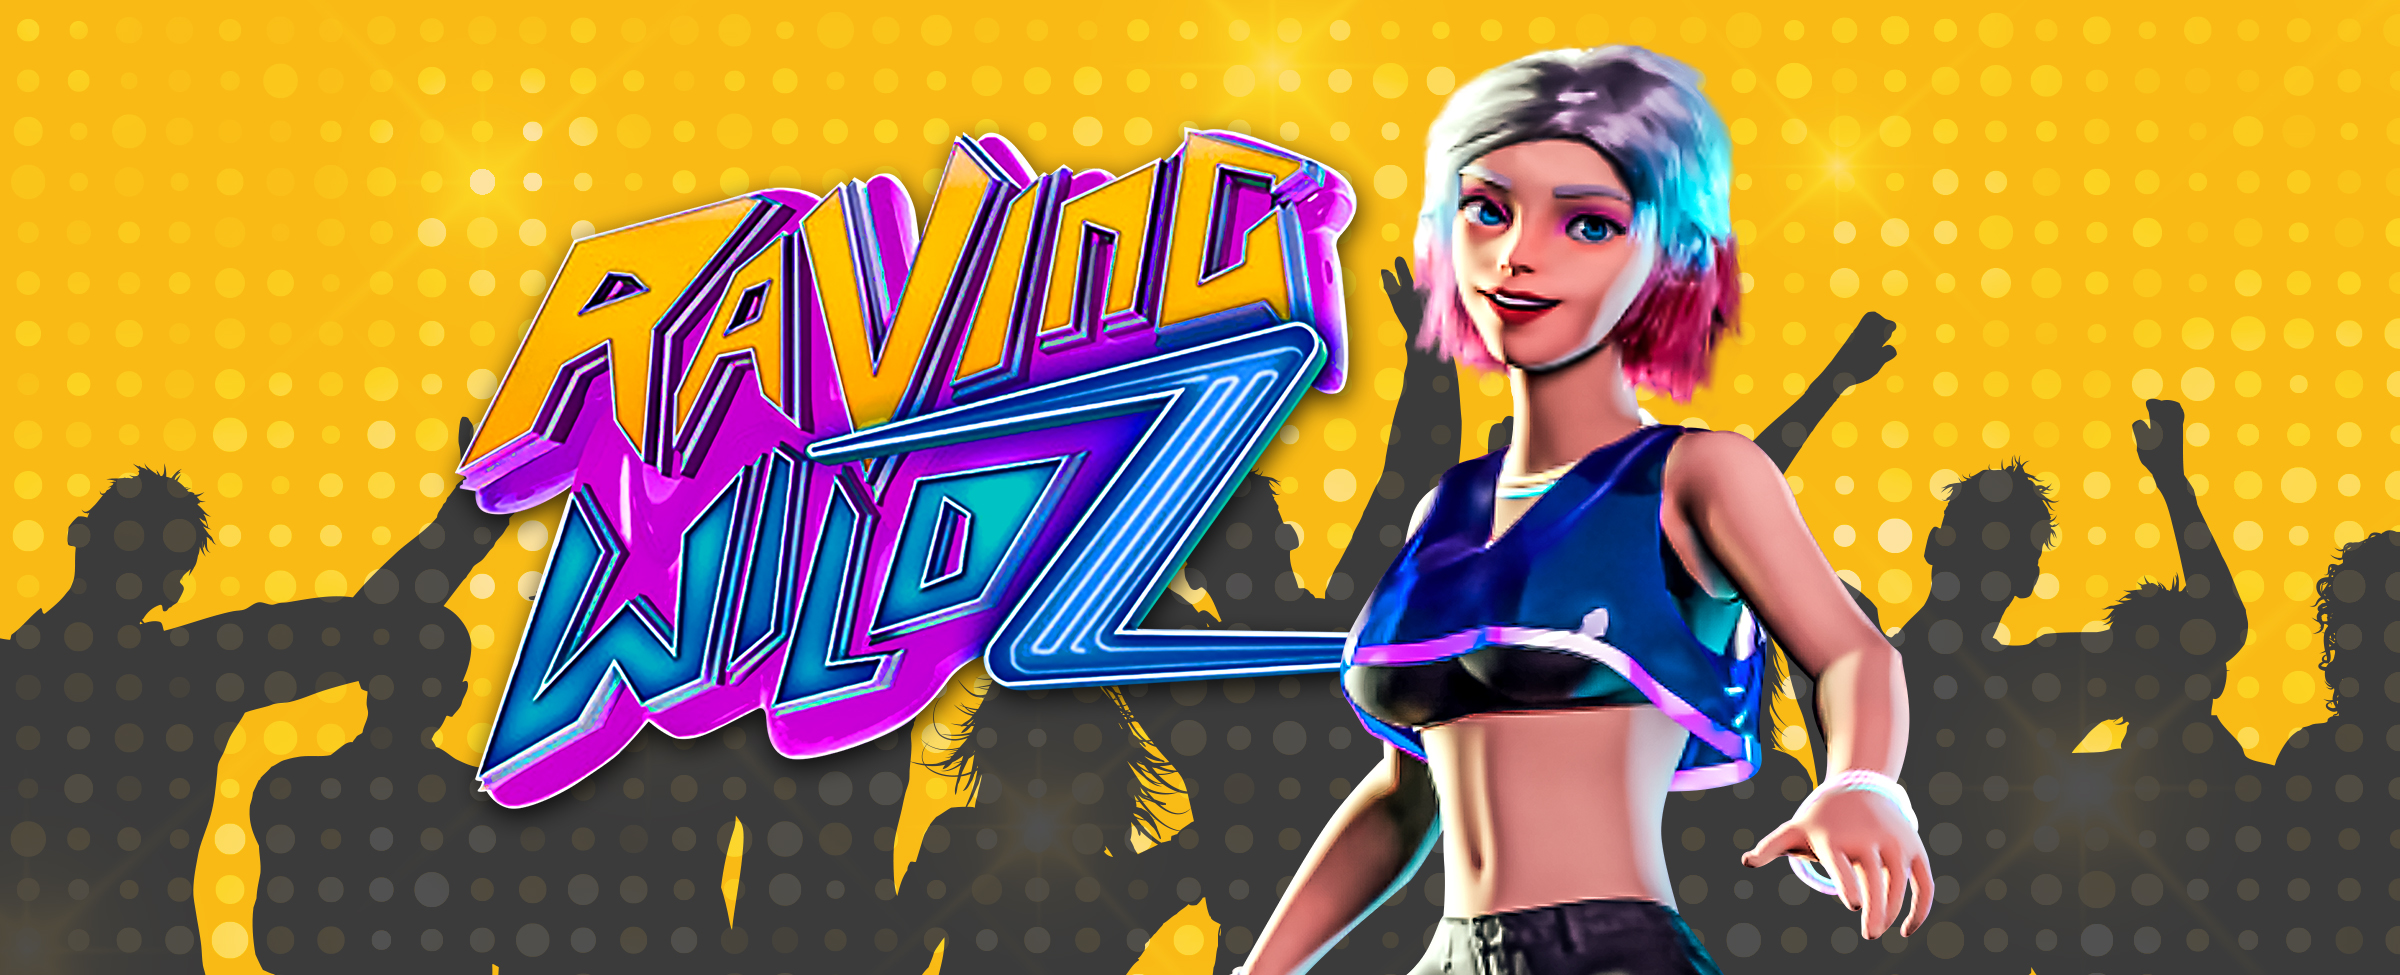 If you’re a raver from way back, you’re going to spring into action like a polaroid picture in this top new pokie, Raving Wildz.